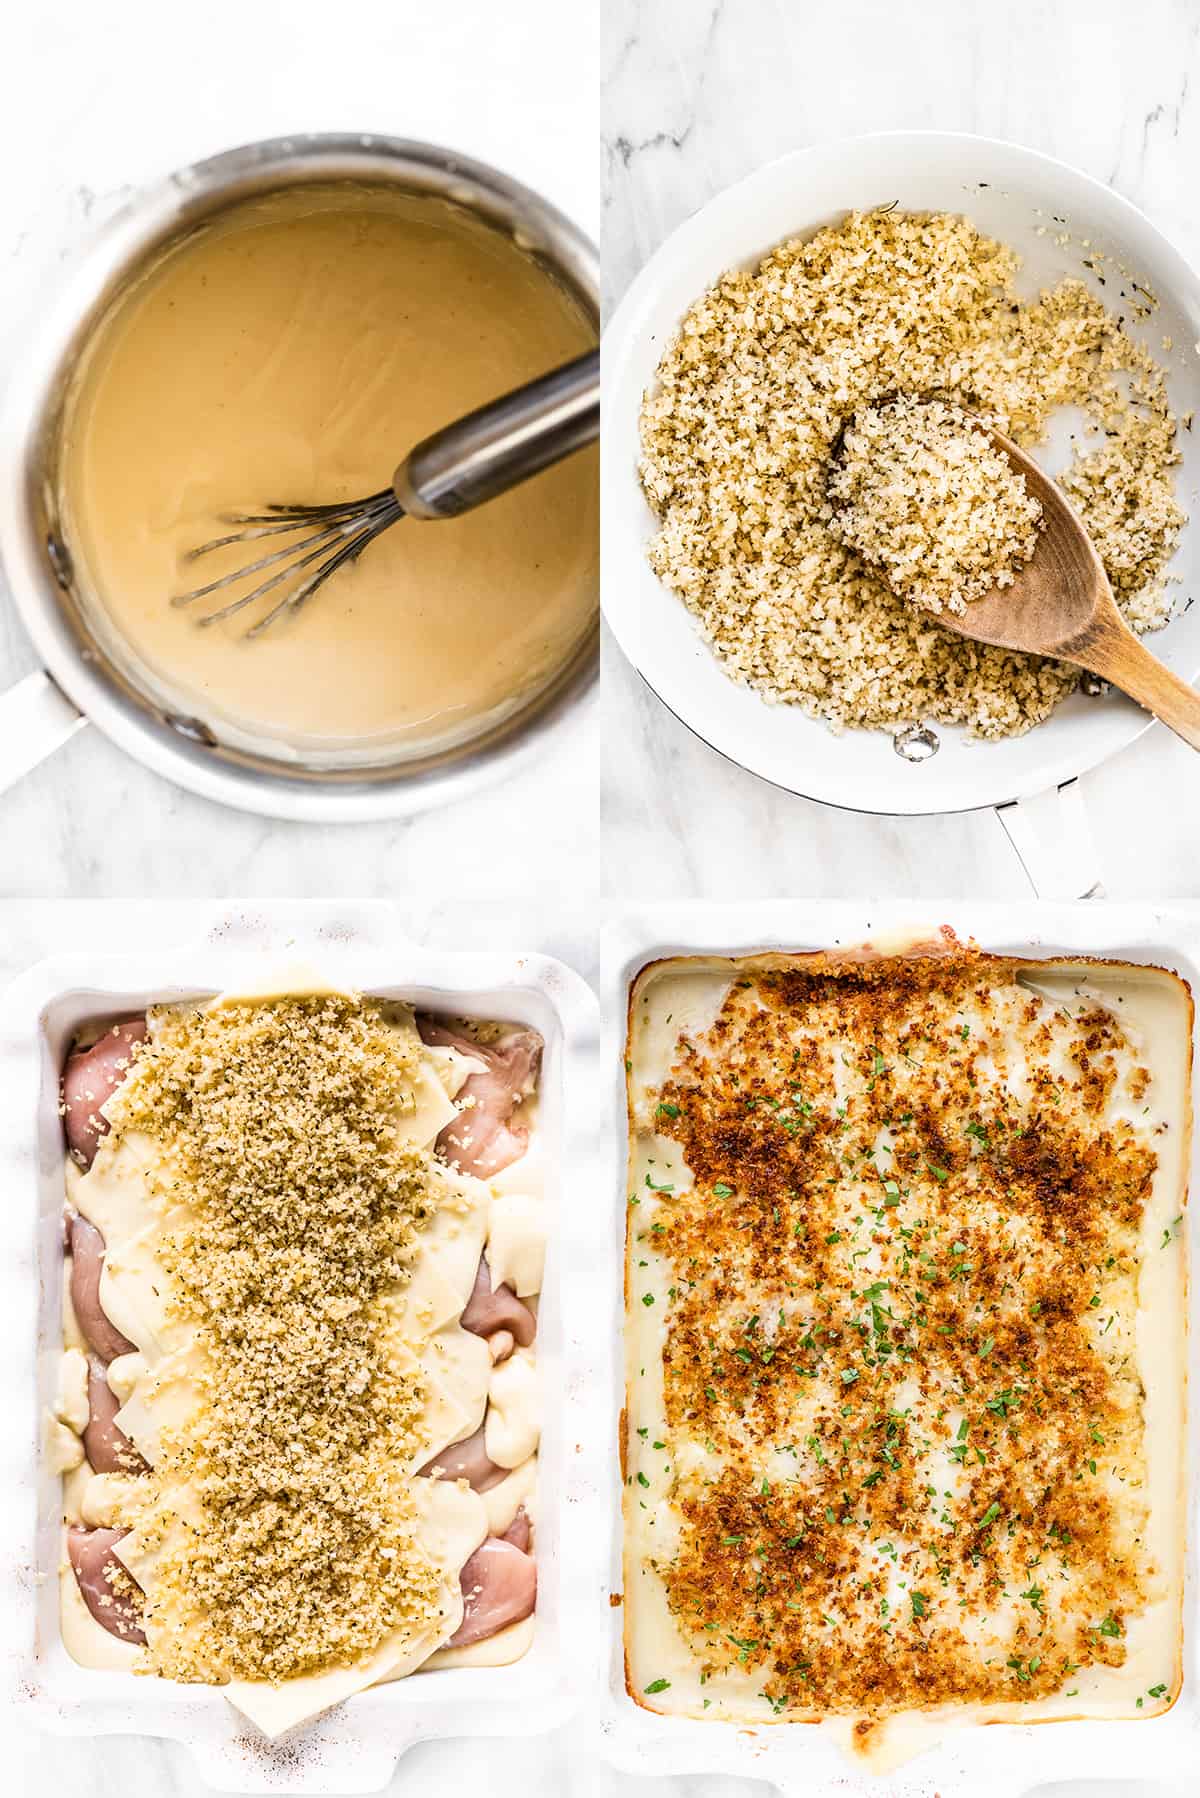 4 pictures showing how to make this swiss chicken bake recipe.